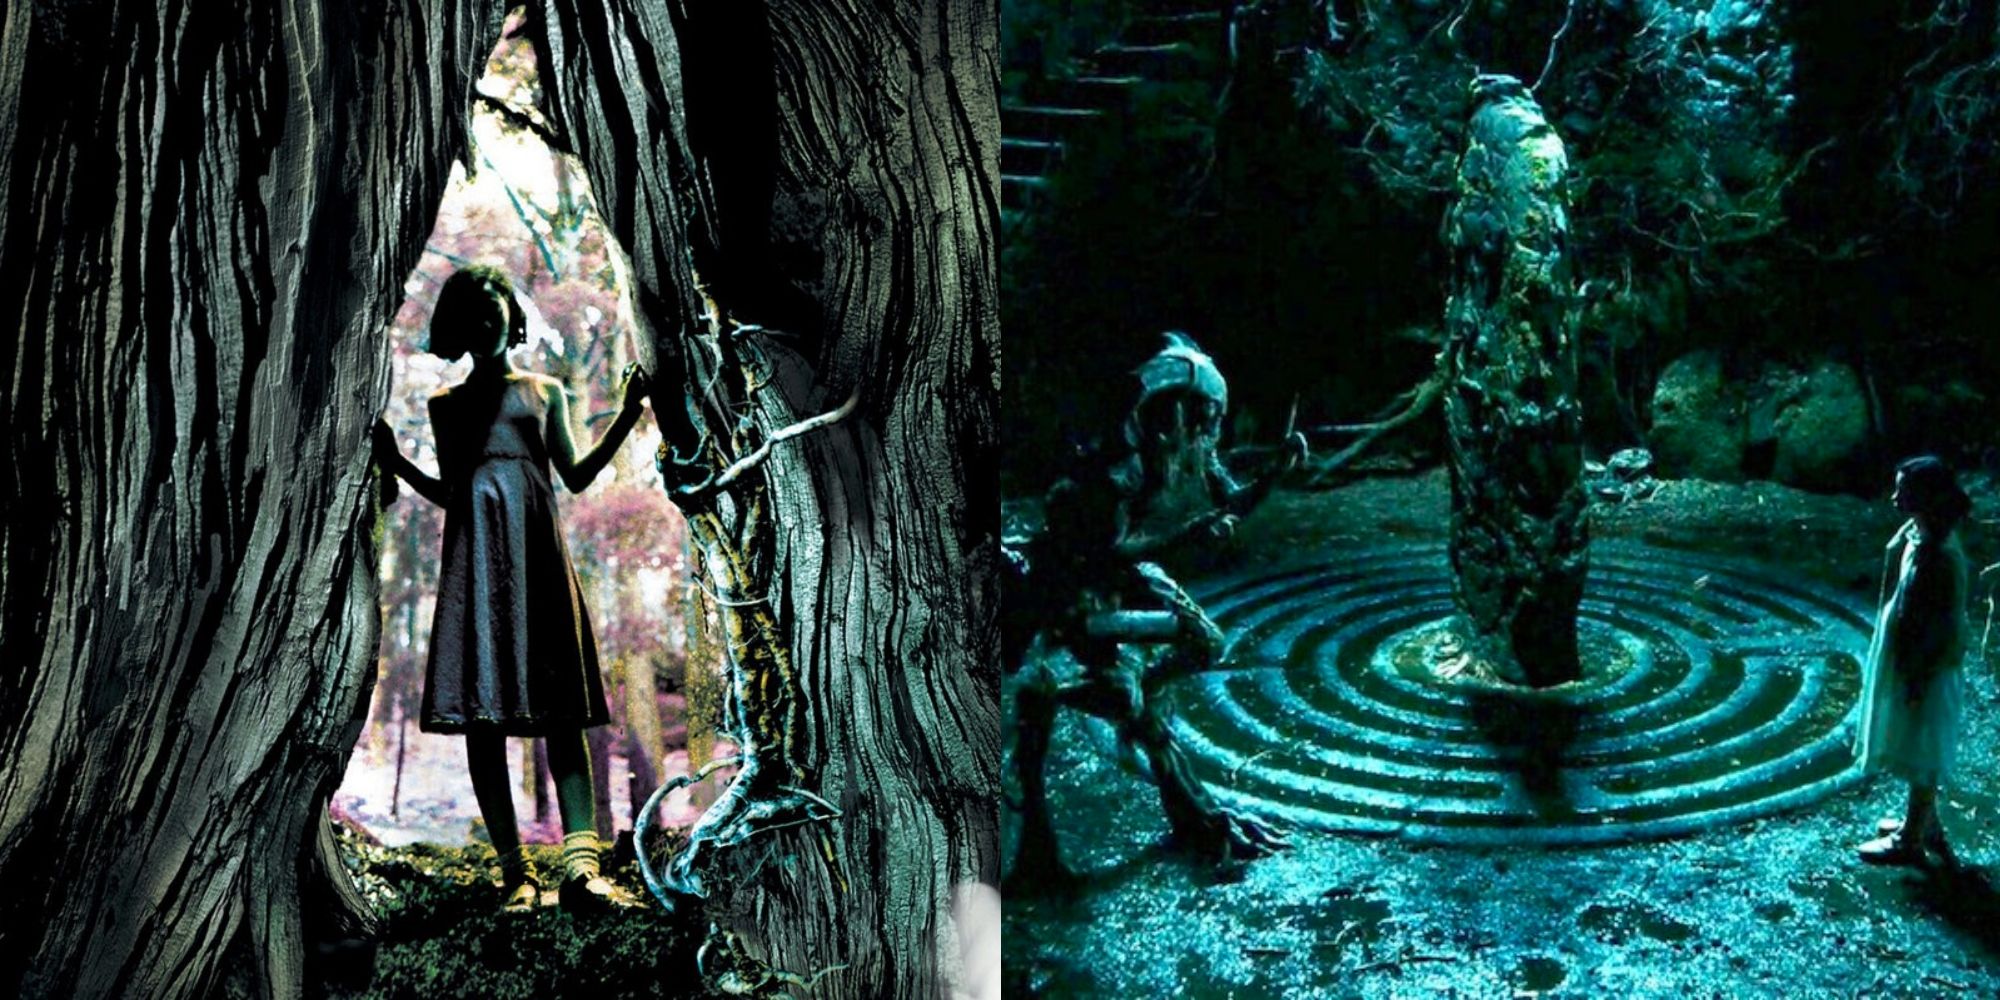 The Underground Realms in Pan's Labyrinth